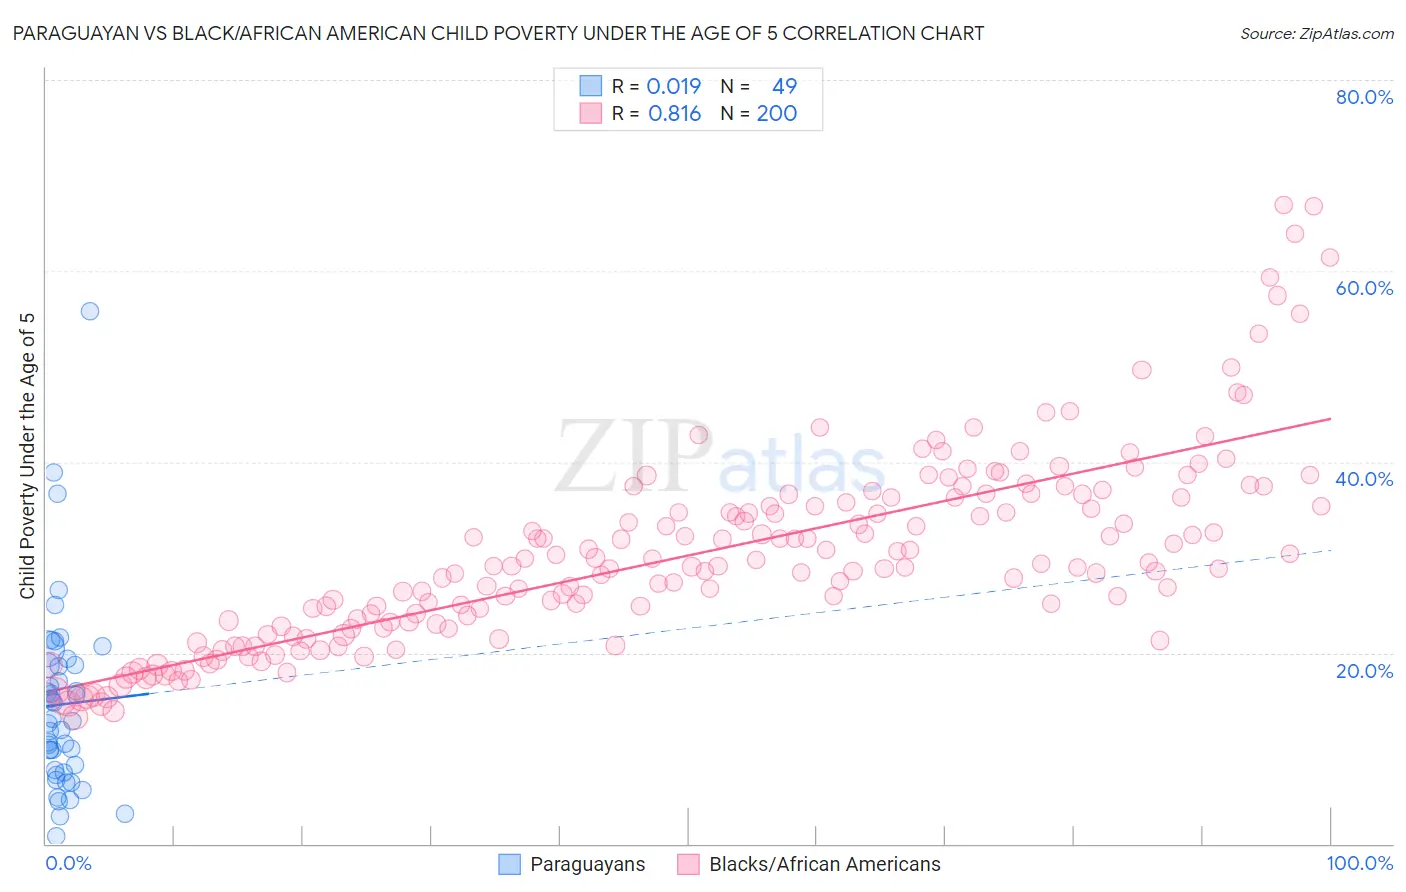 Paraguayan vs Black/African American Child Poverty Under the Age of 5